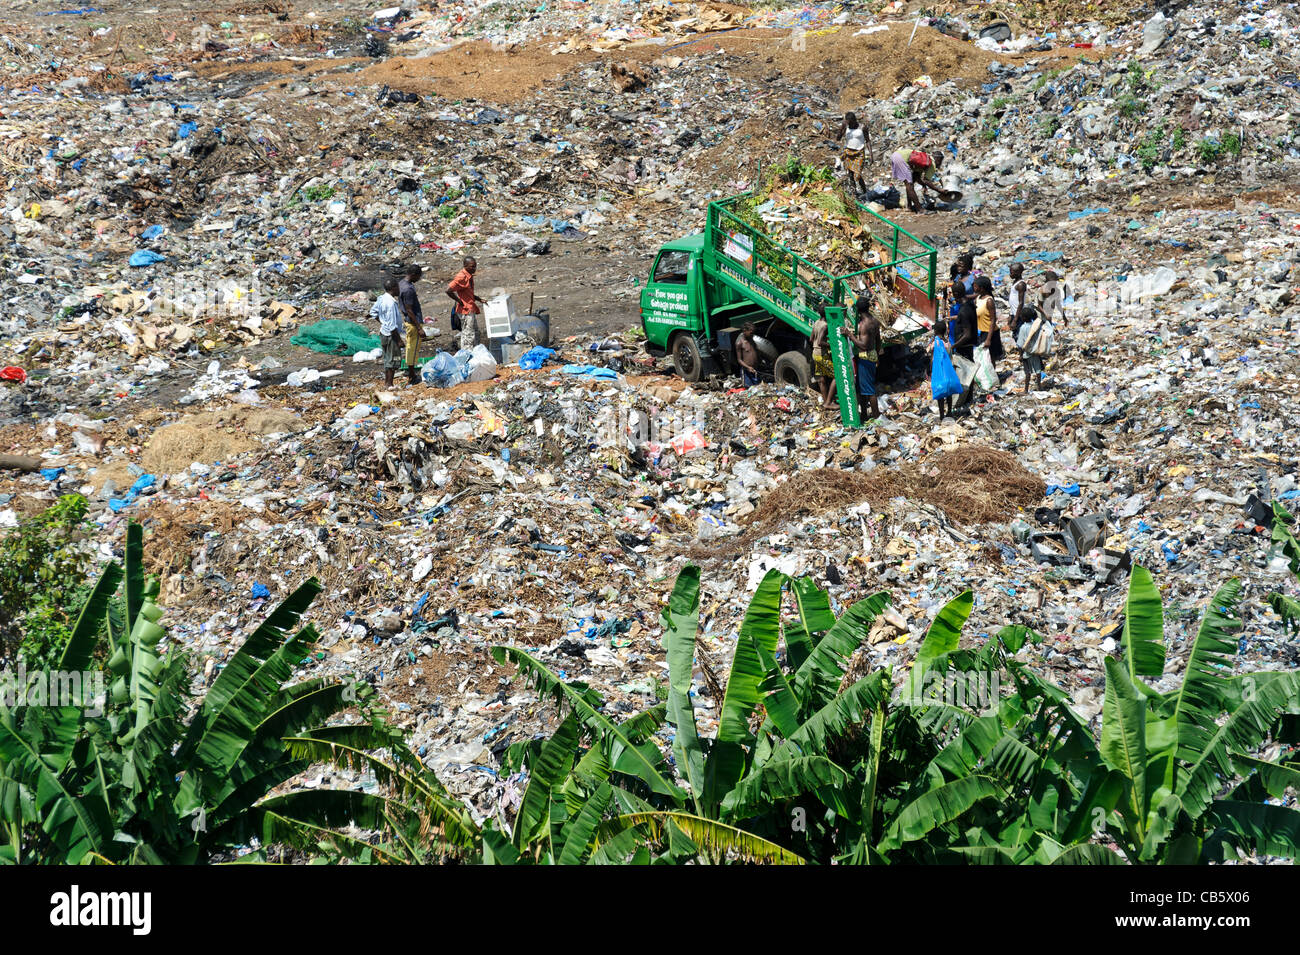 People working on a rubbish dump, collecting plastic and metal waste for recycling, Freetown, Sierra Leone. Stock Photo